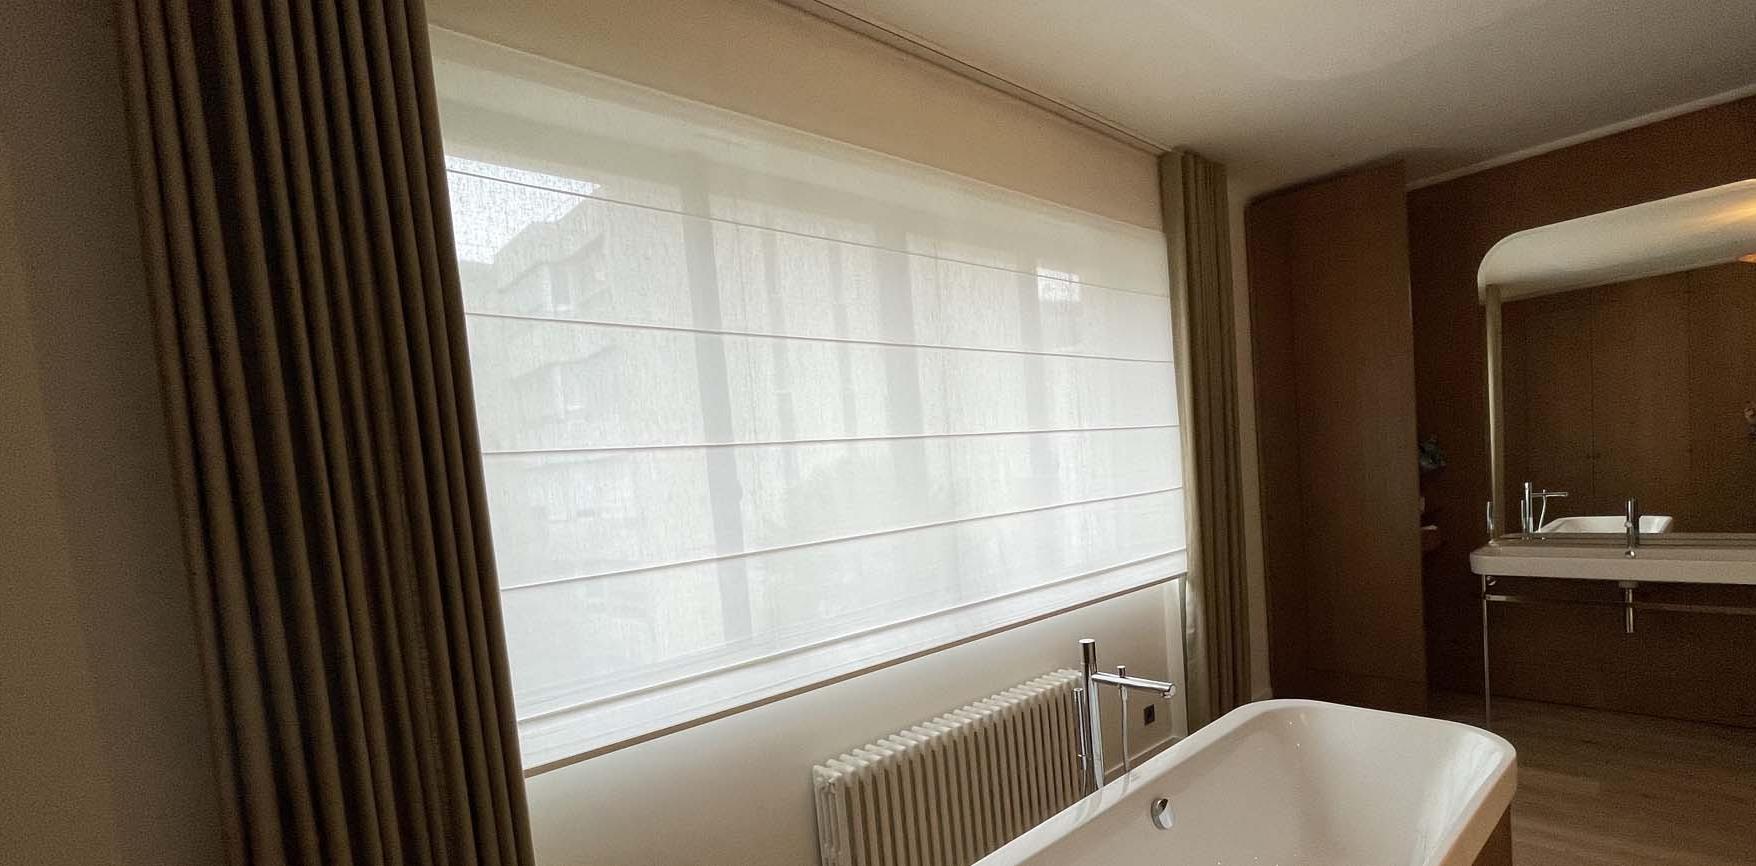 Very wide blind of more than 3 meters. The advantage : the ease of cord handling.